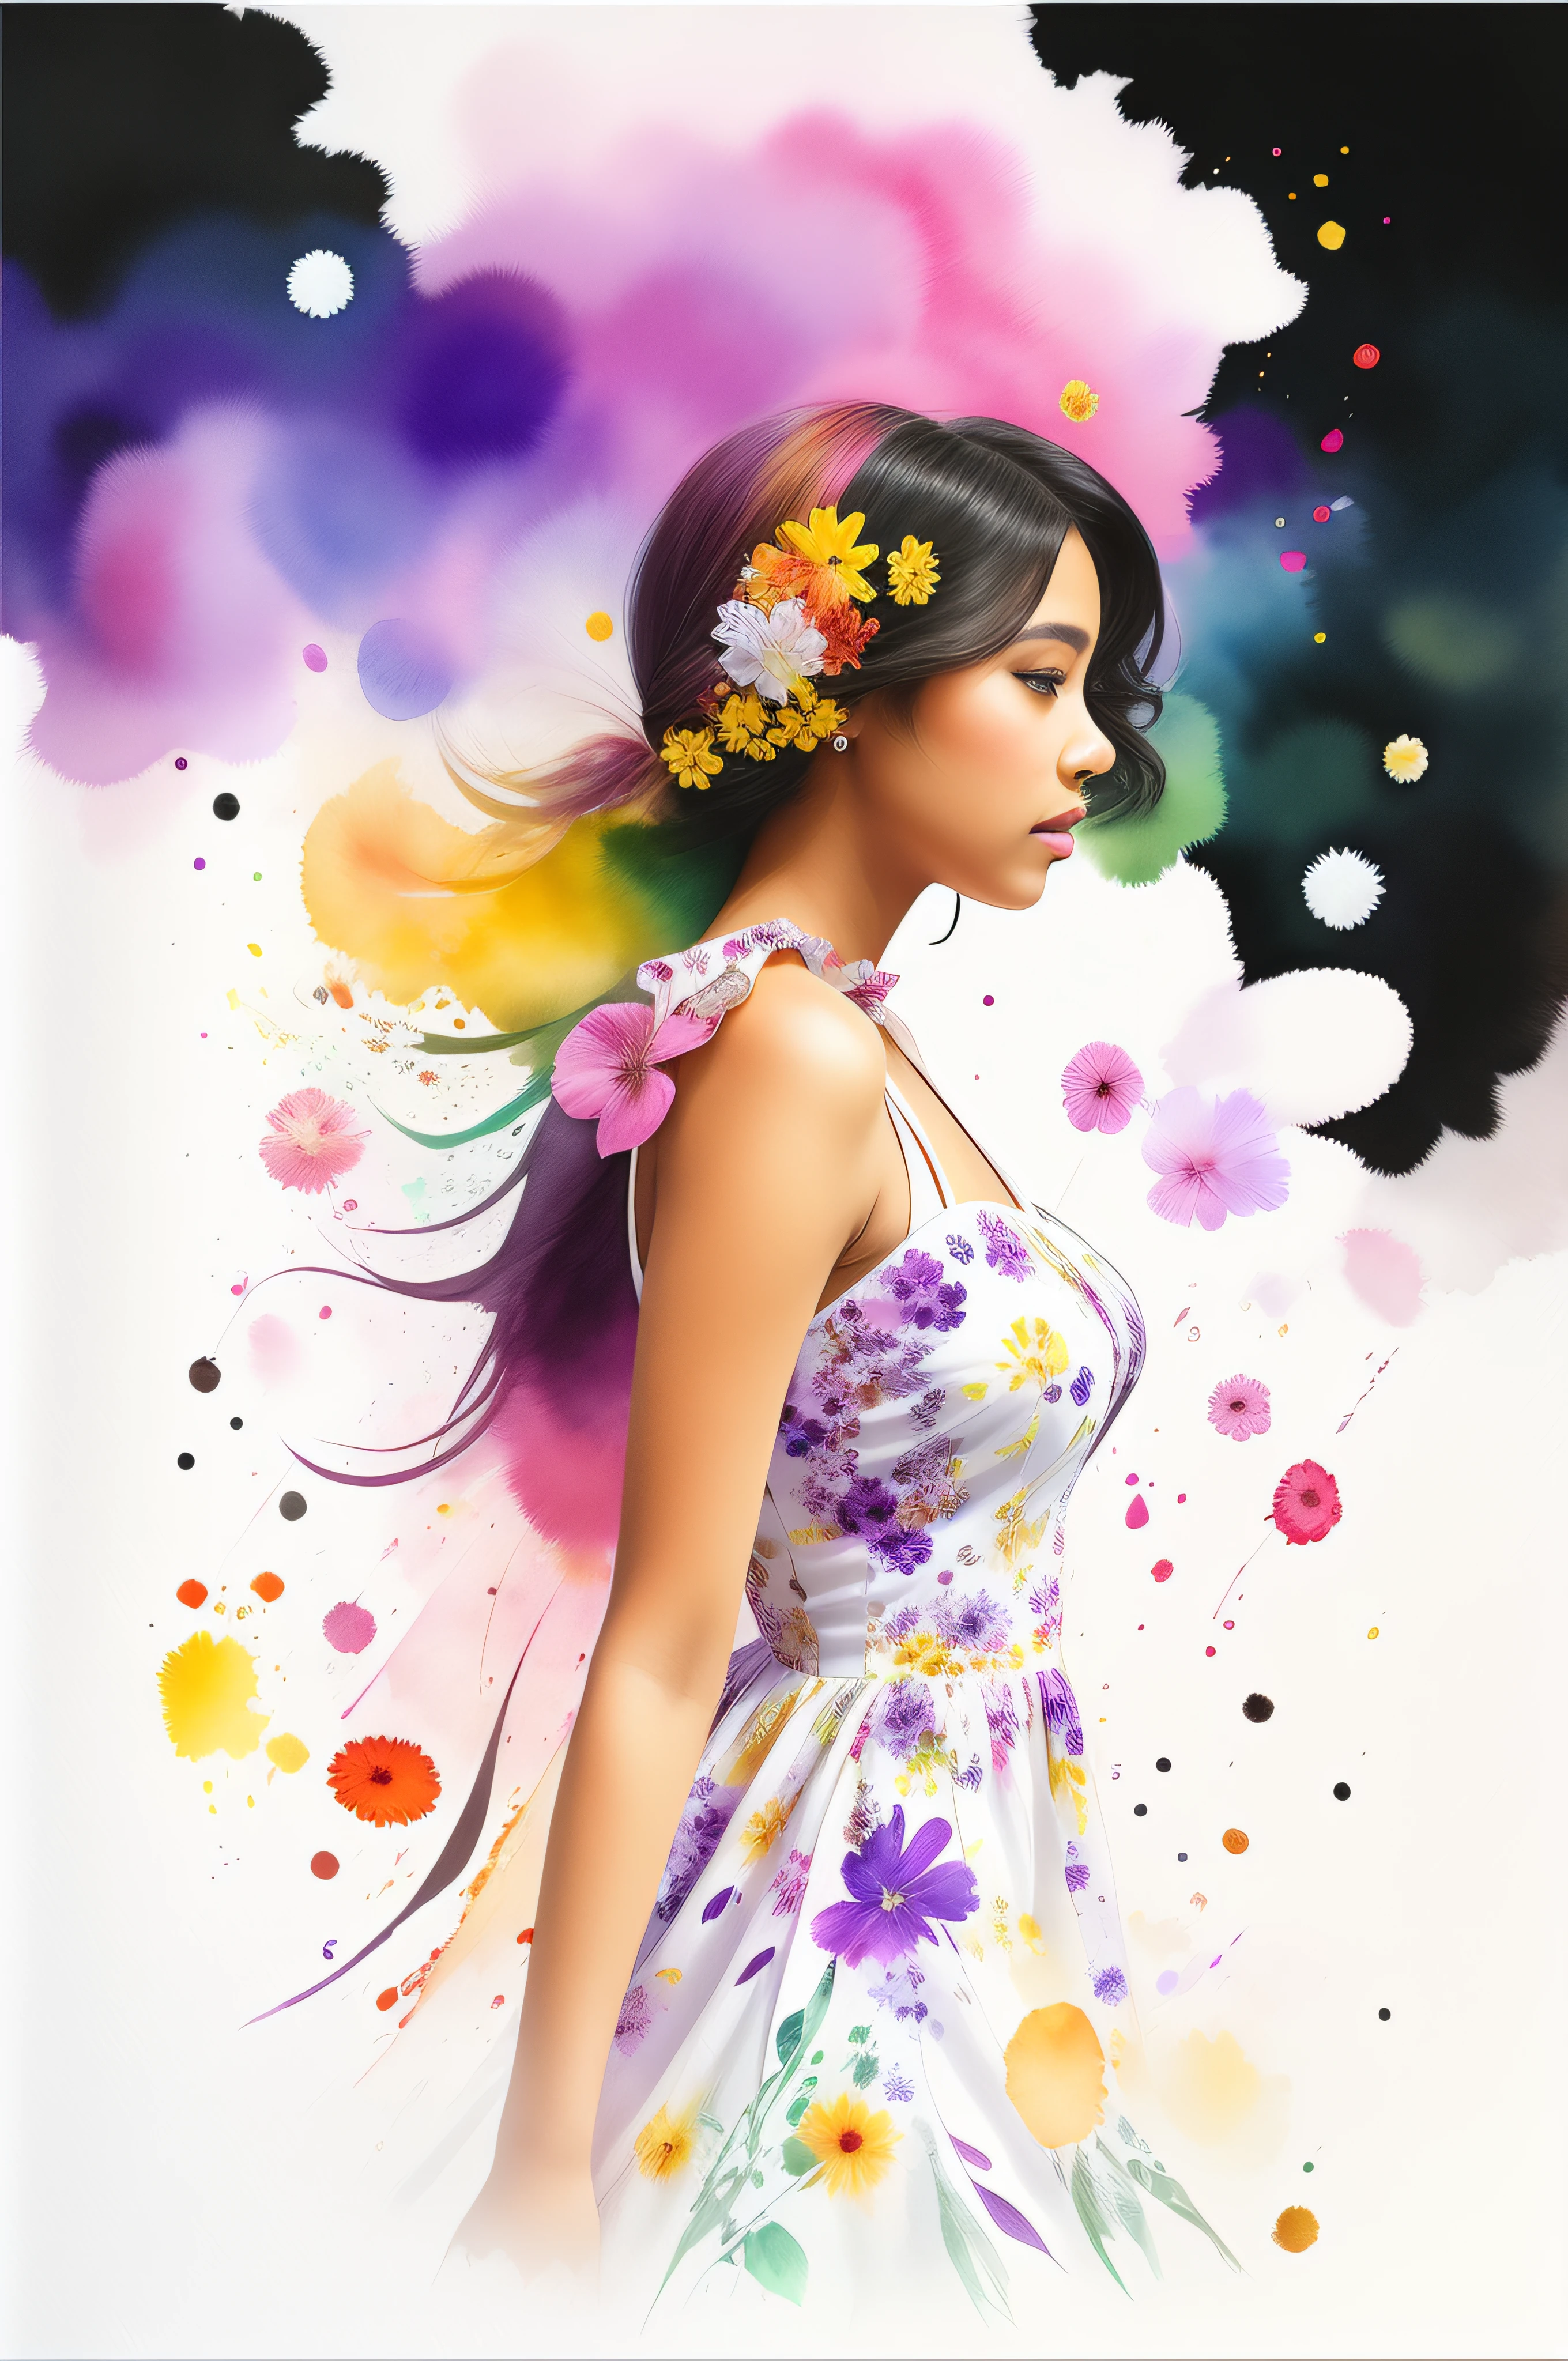 Beautiful ebony woman wearing a floral white dress, floral flying around, rainbow purple highlights, background of assorted floral, splashes of watercolor, sideview, textured, photo realistic, 12k quality, watercolor